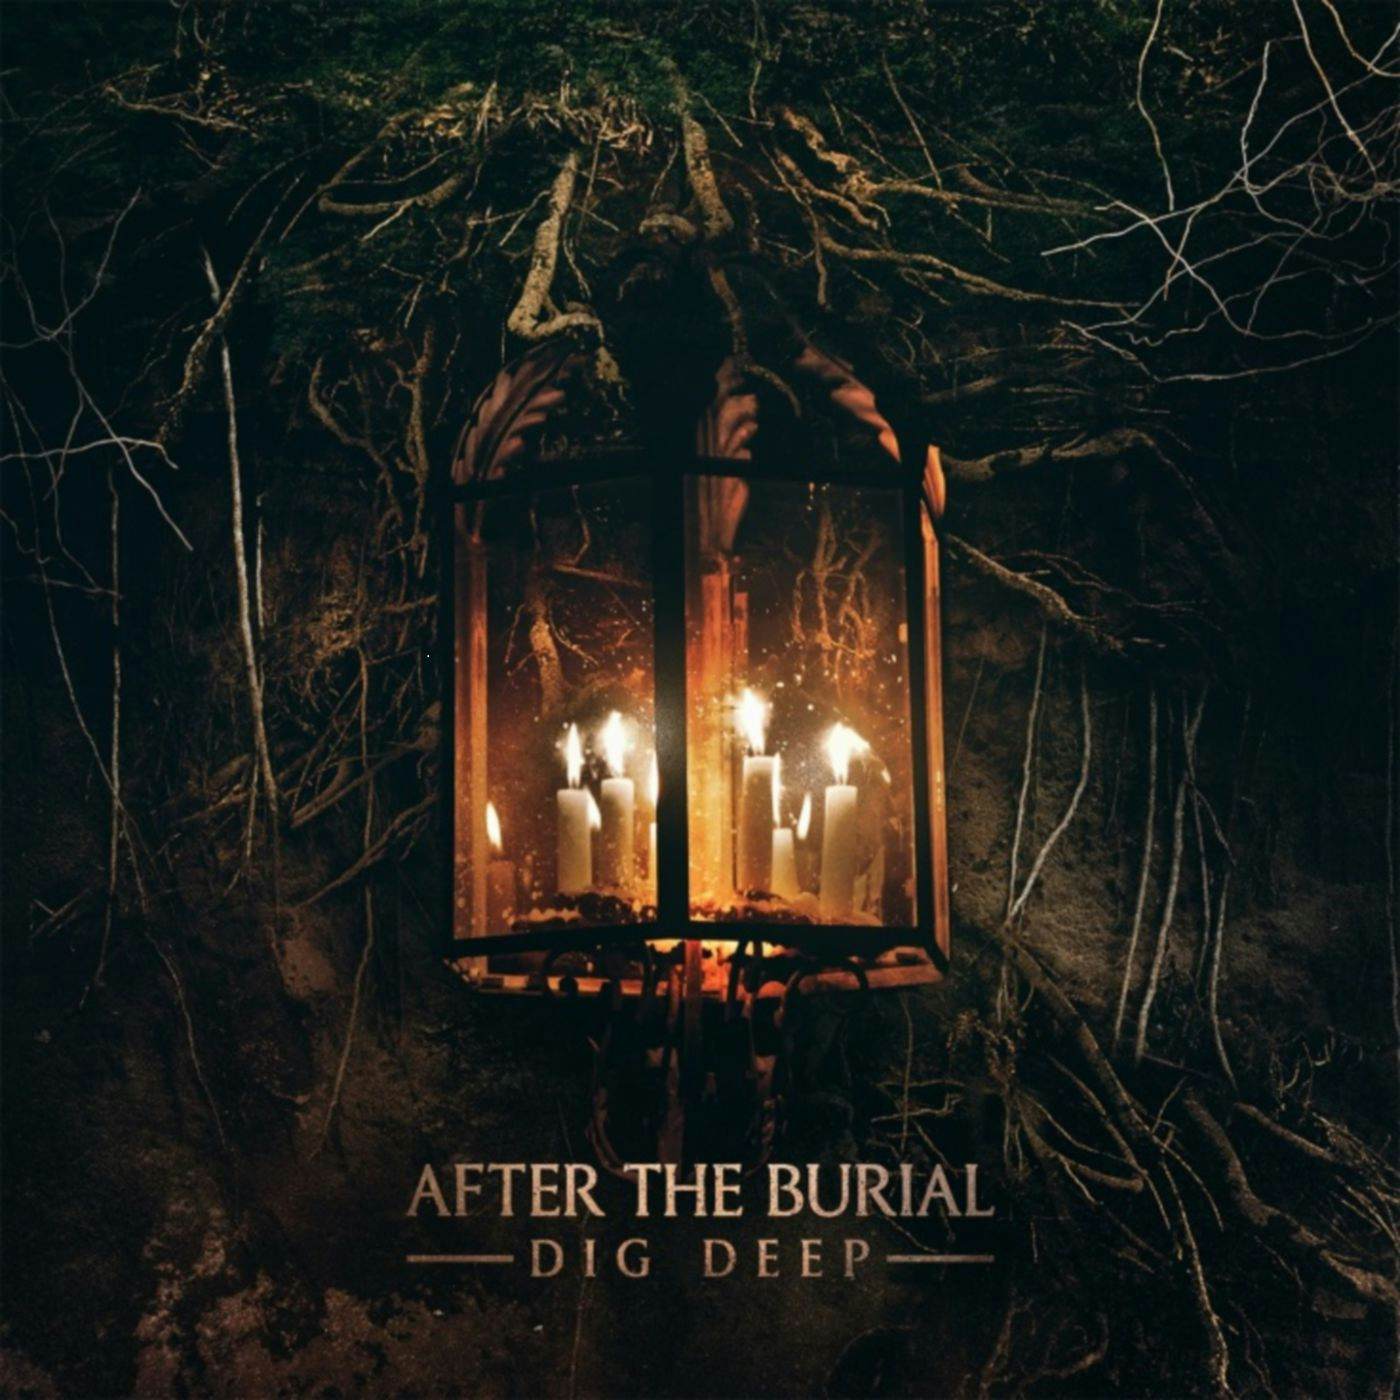 After The Burial DIG DEEP CD